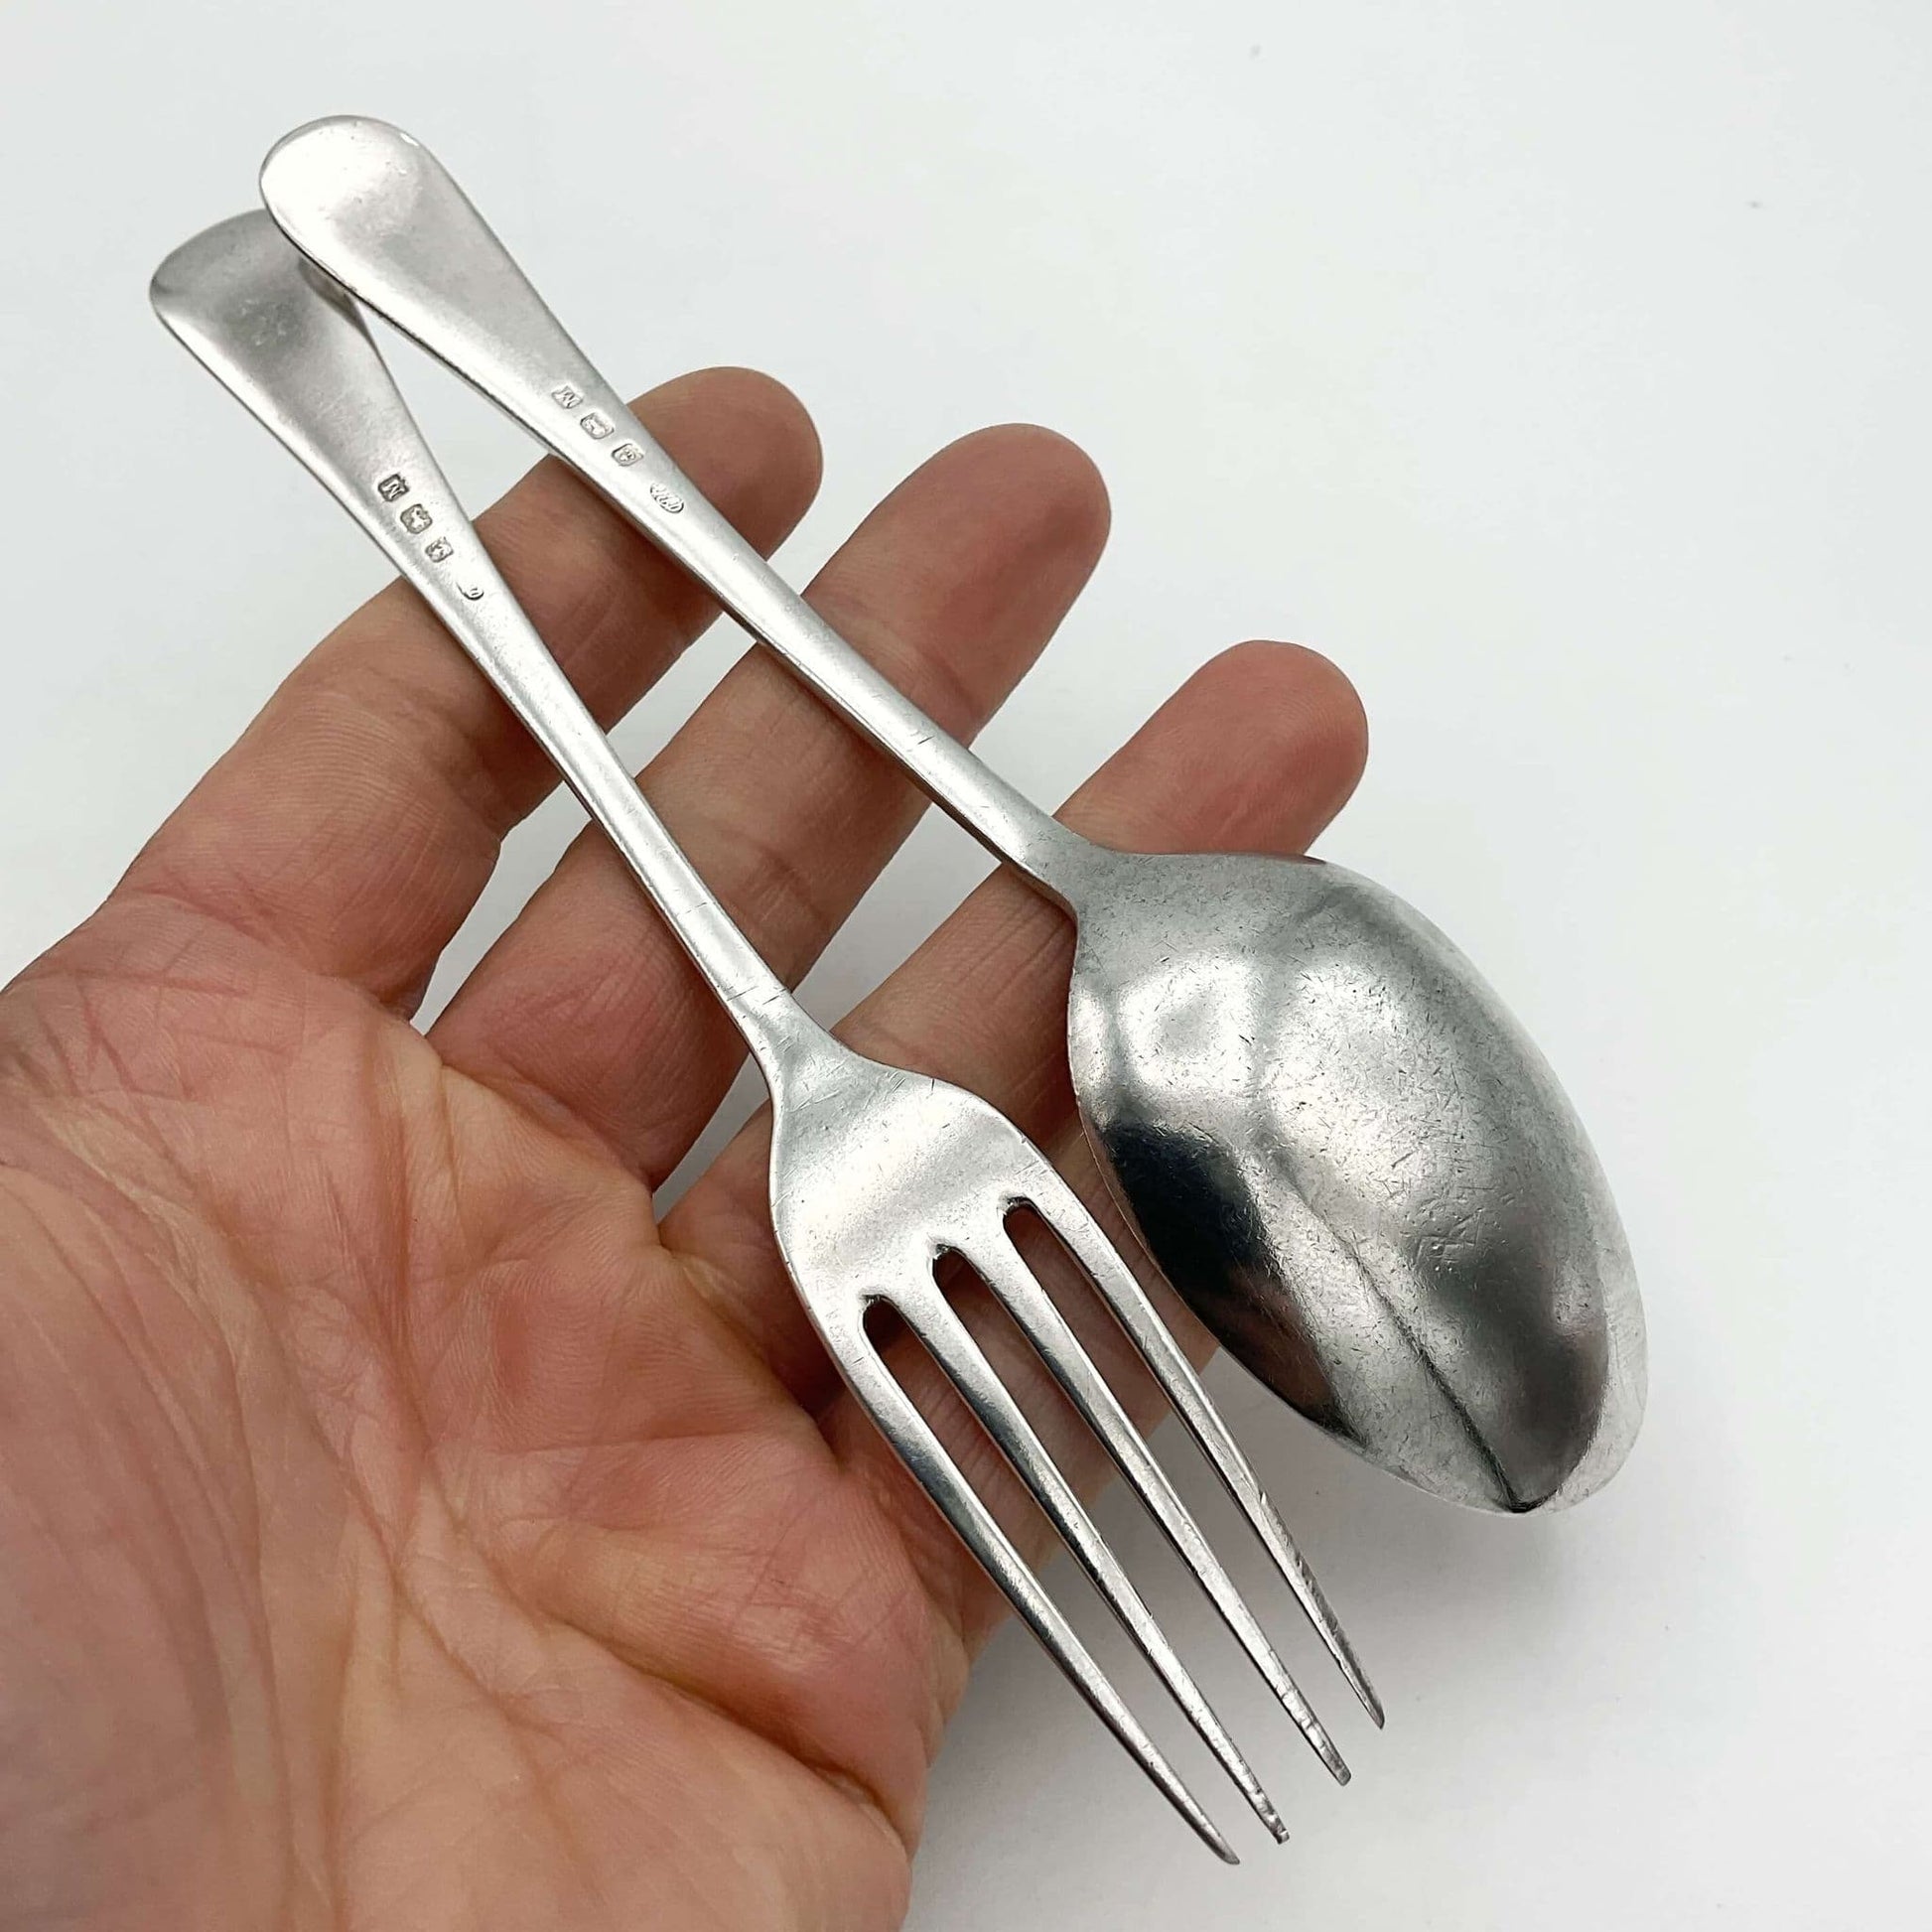 A matching silver spoon and fork sitting on a hand showing the back view.